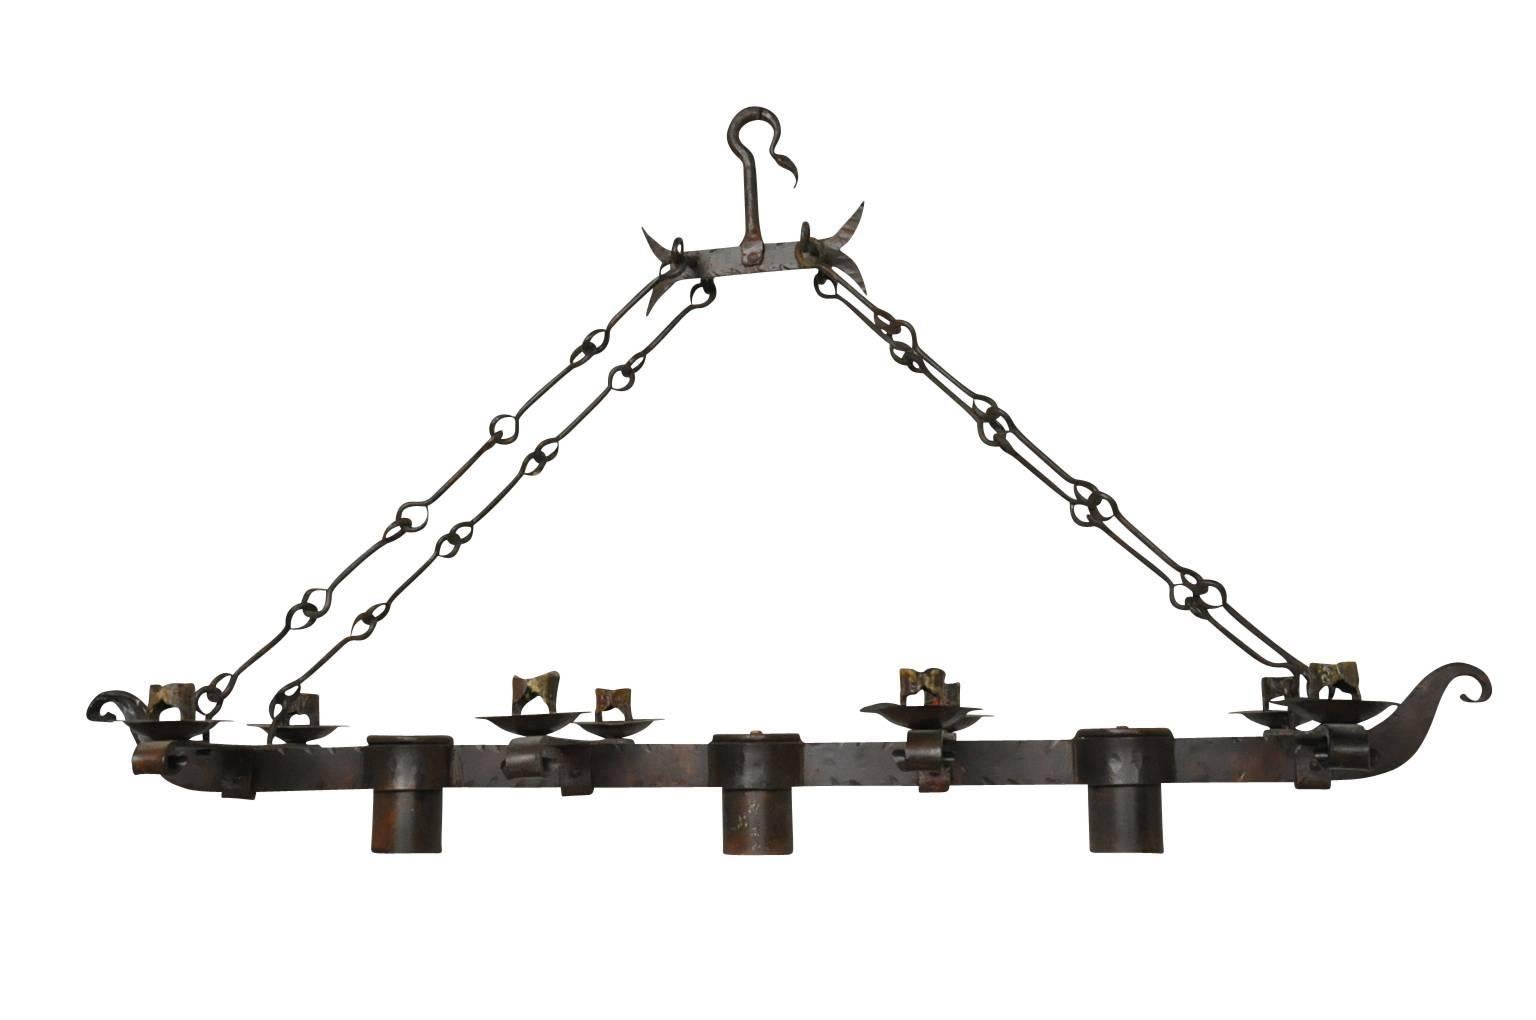 Very handsome Spanish rectangular shaped chandelier in handsomely worked iron. Wonderful over a kitchen island.